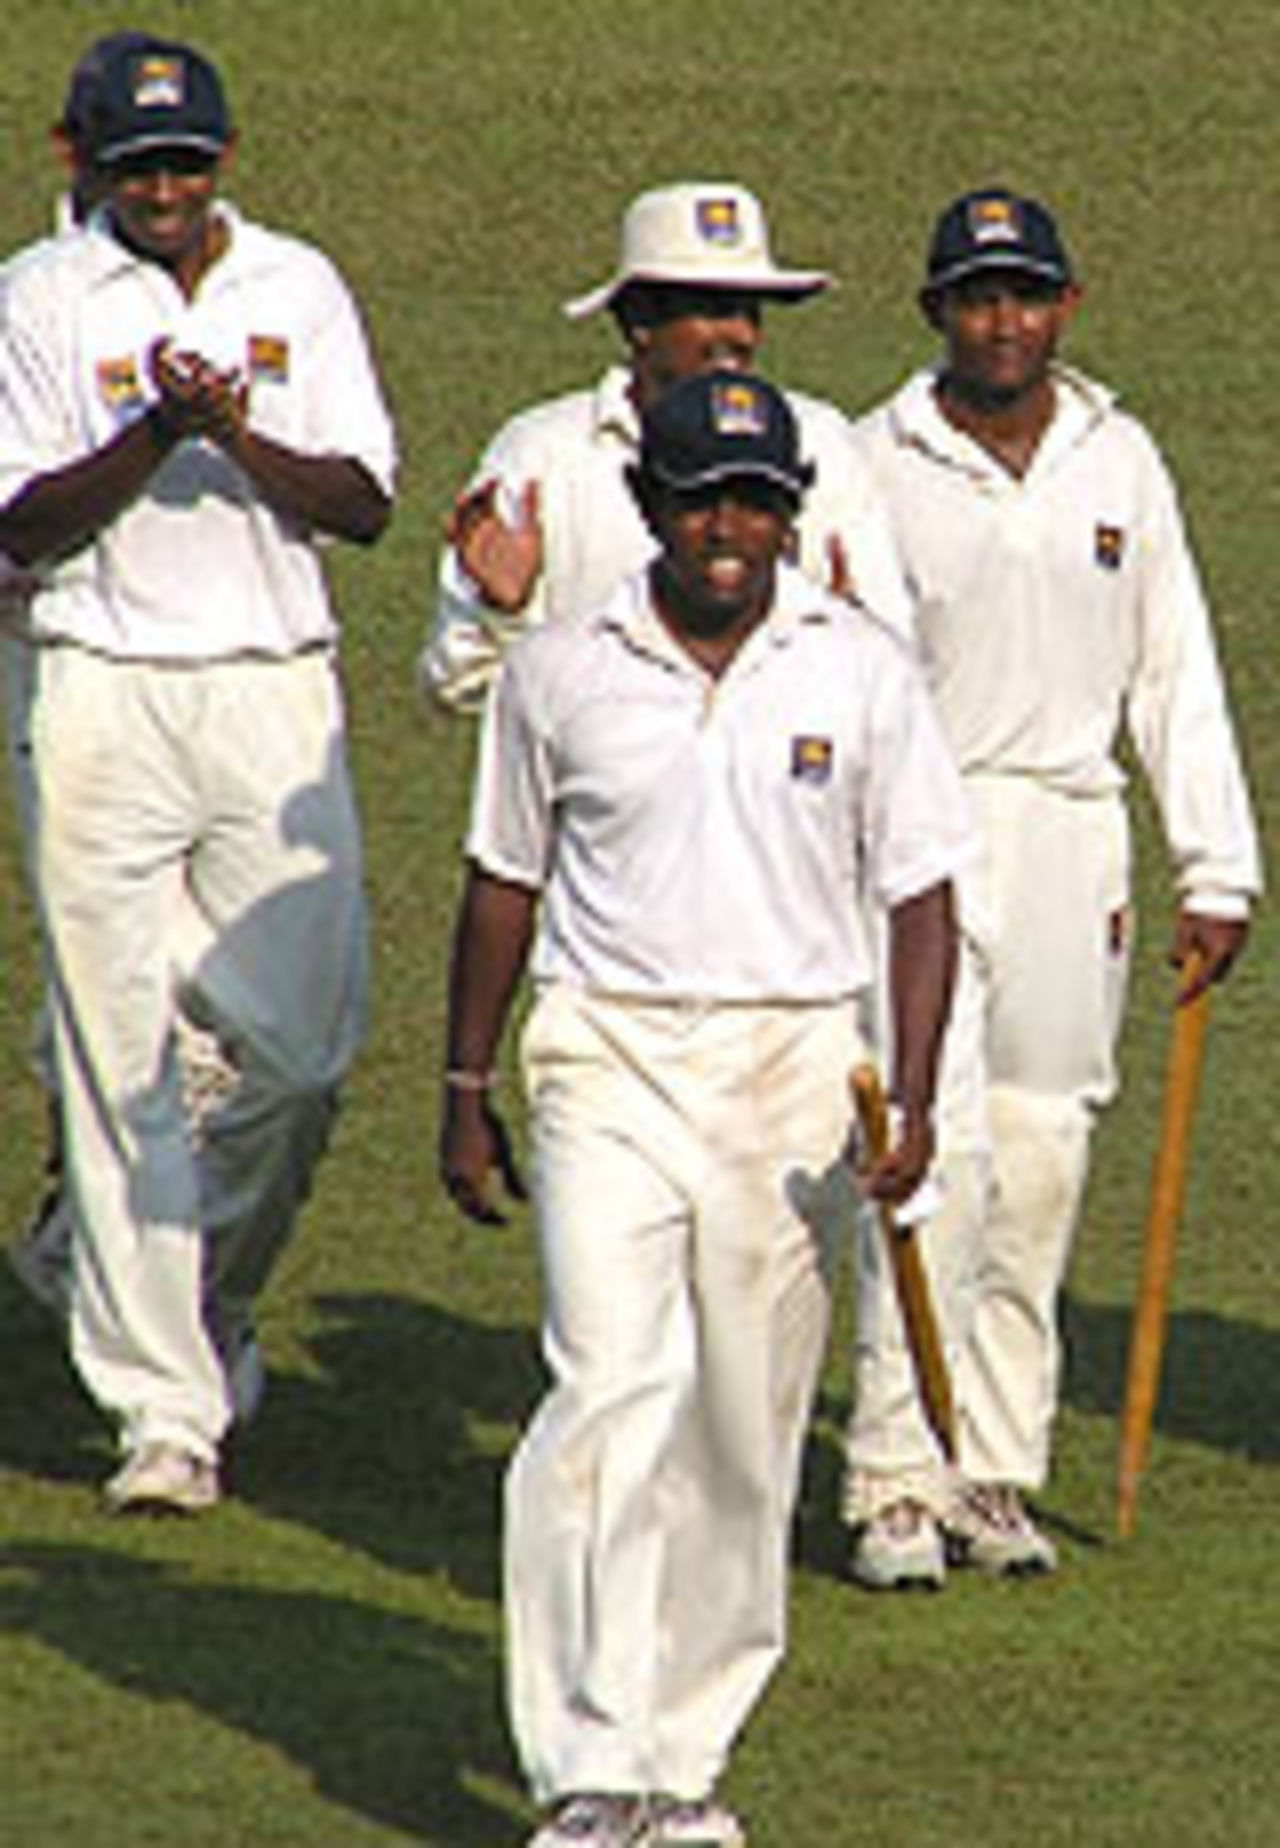 MMalinga Bandara is clapped from the field on the final day of England's A's second unofficial Test against Sri Lanka A in Colombo, March 15, 2005